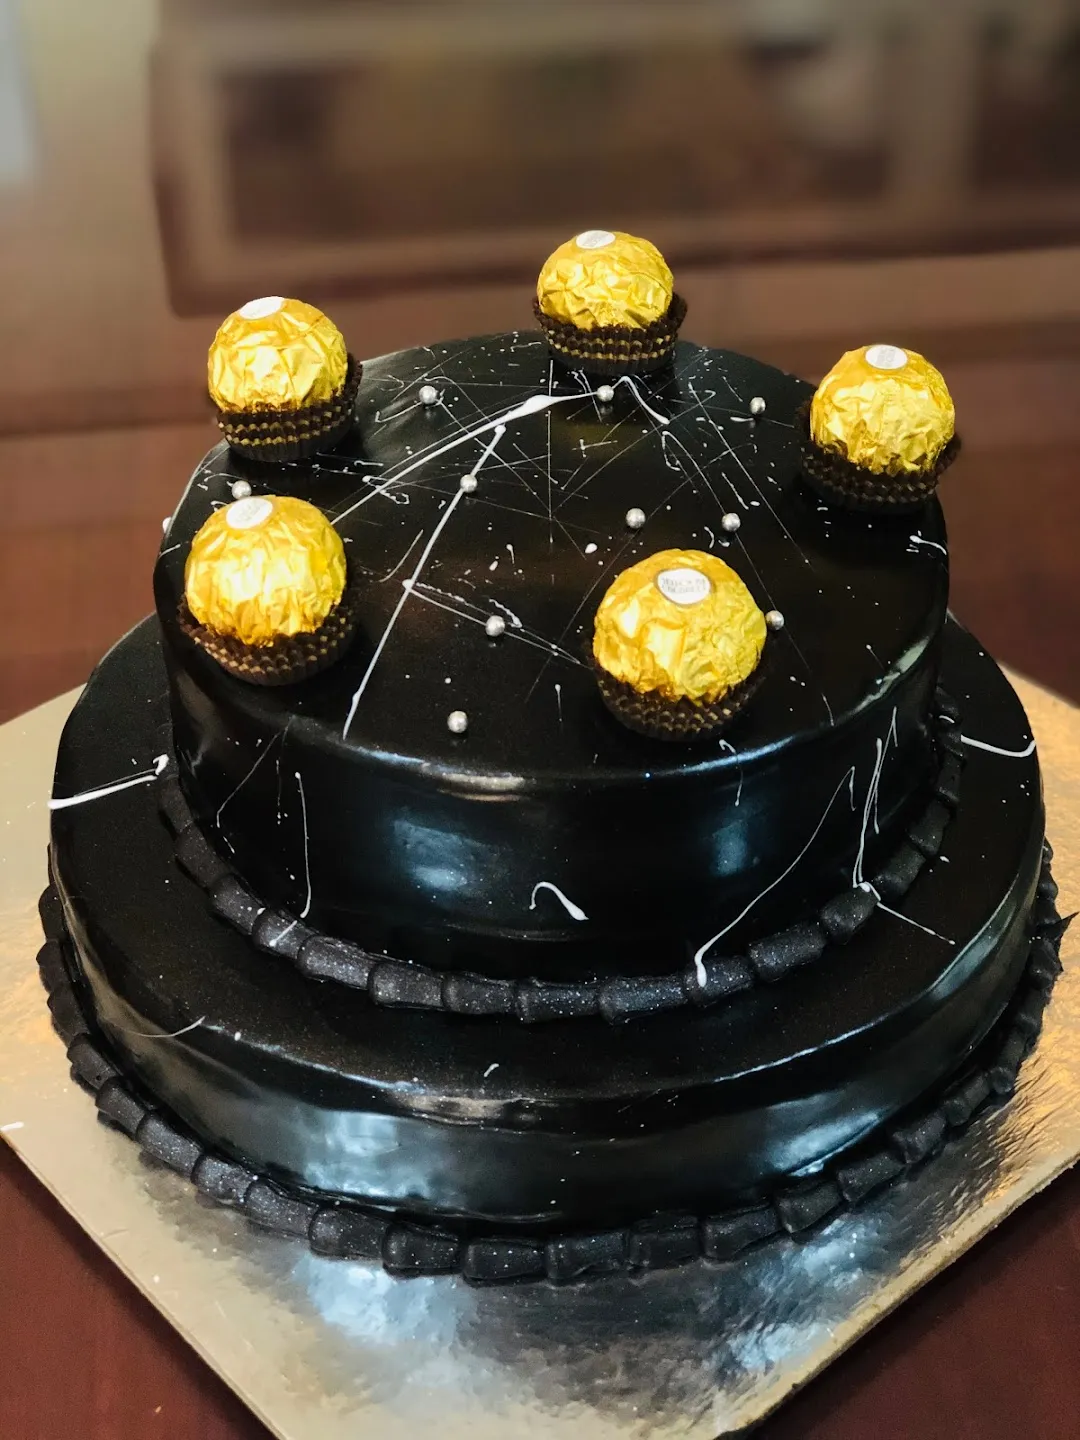 Best Cake Delivery in India - Order Cake Online